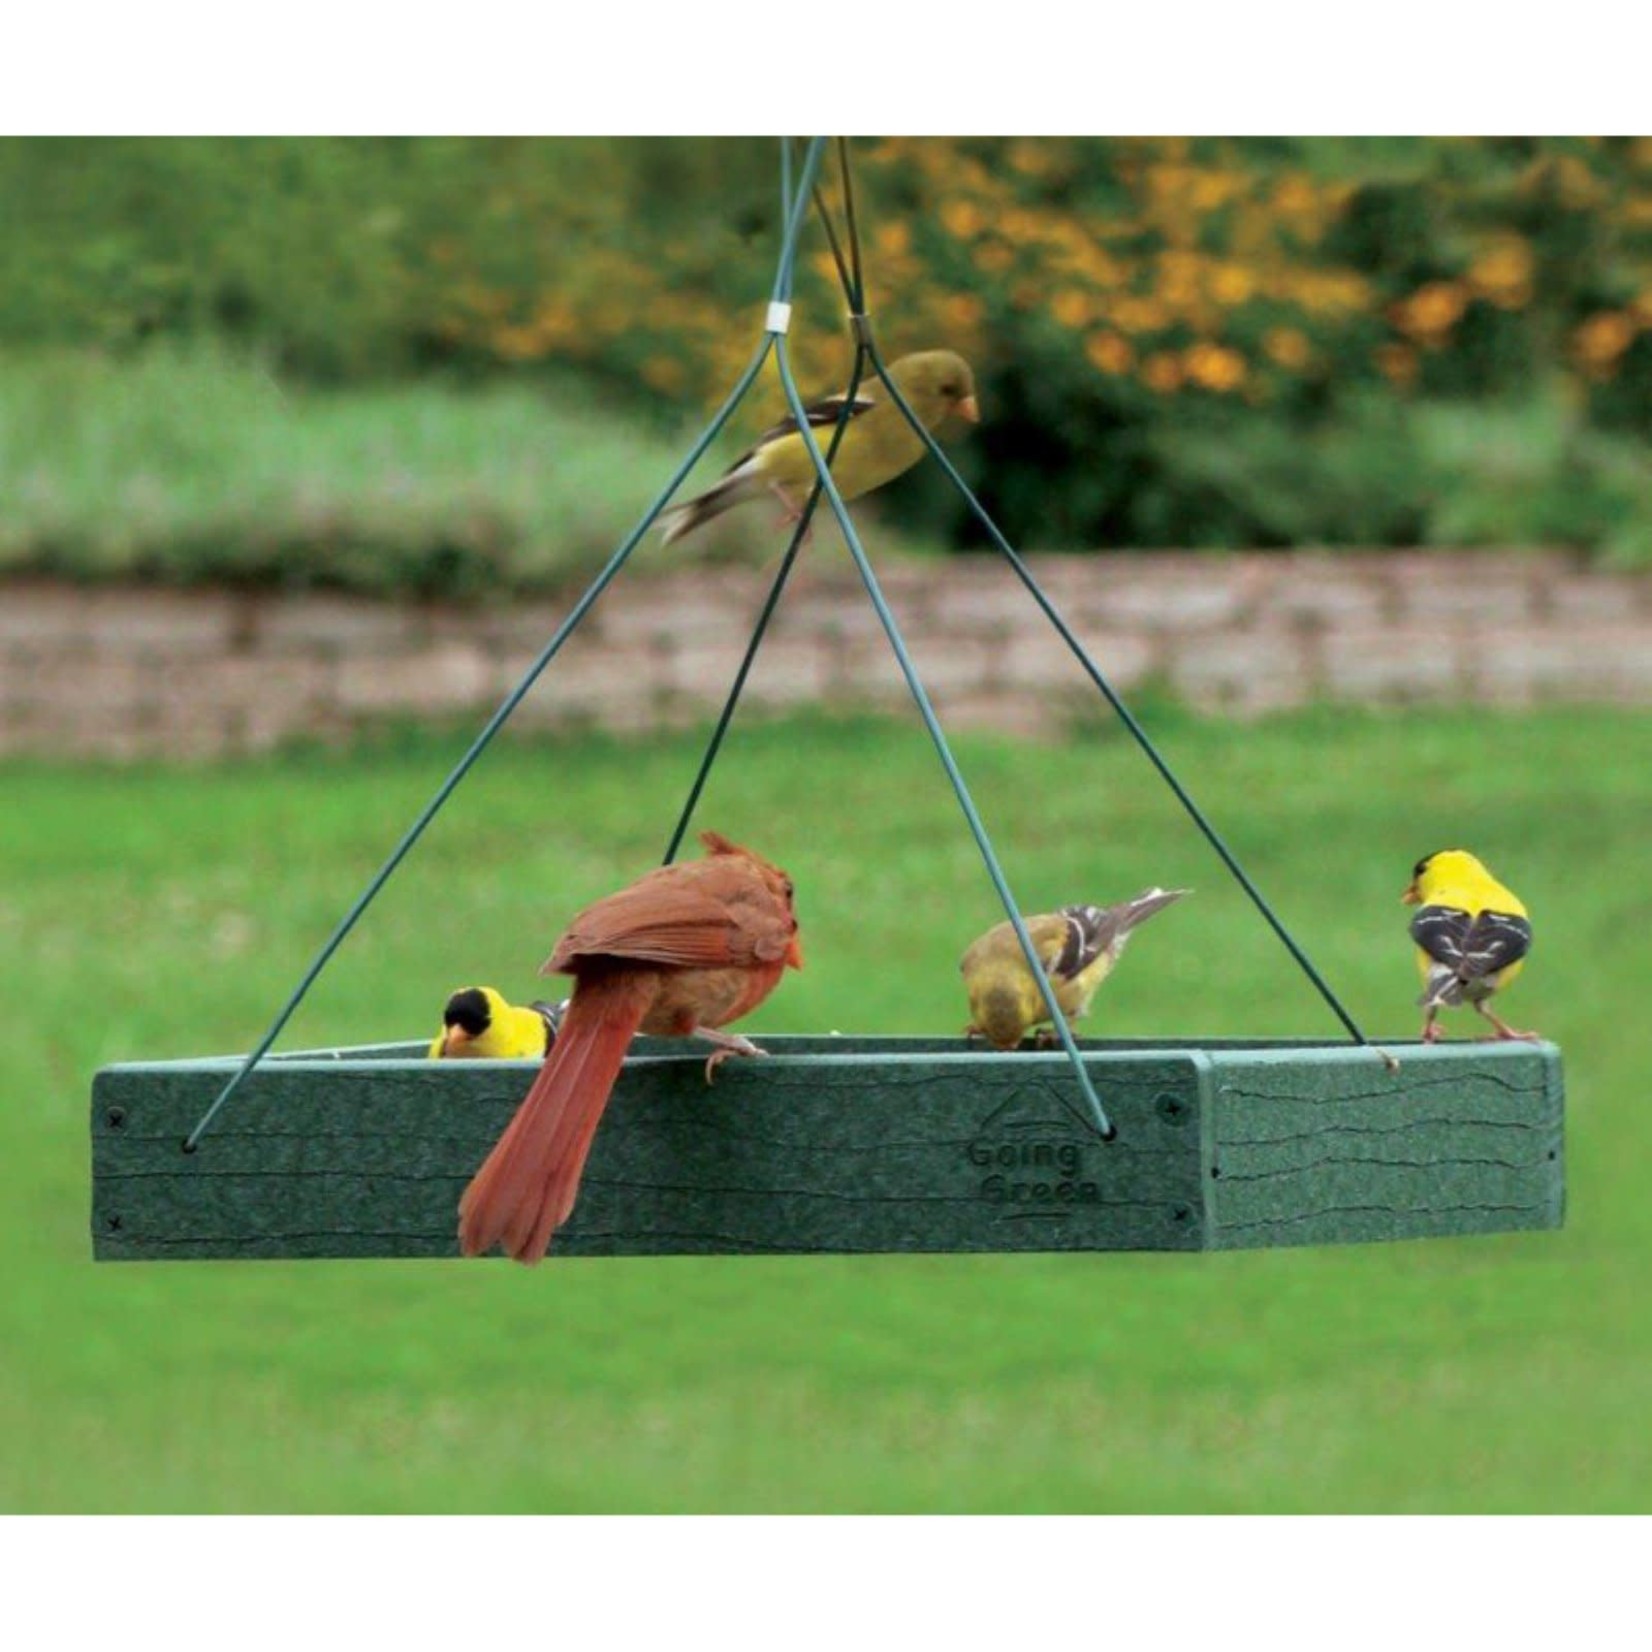 Hanging Tray Feeder - Going Green